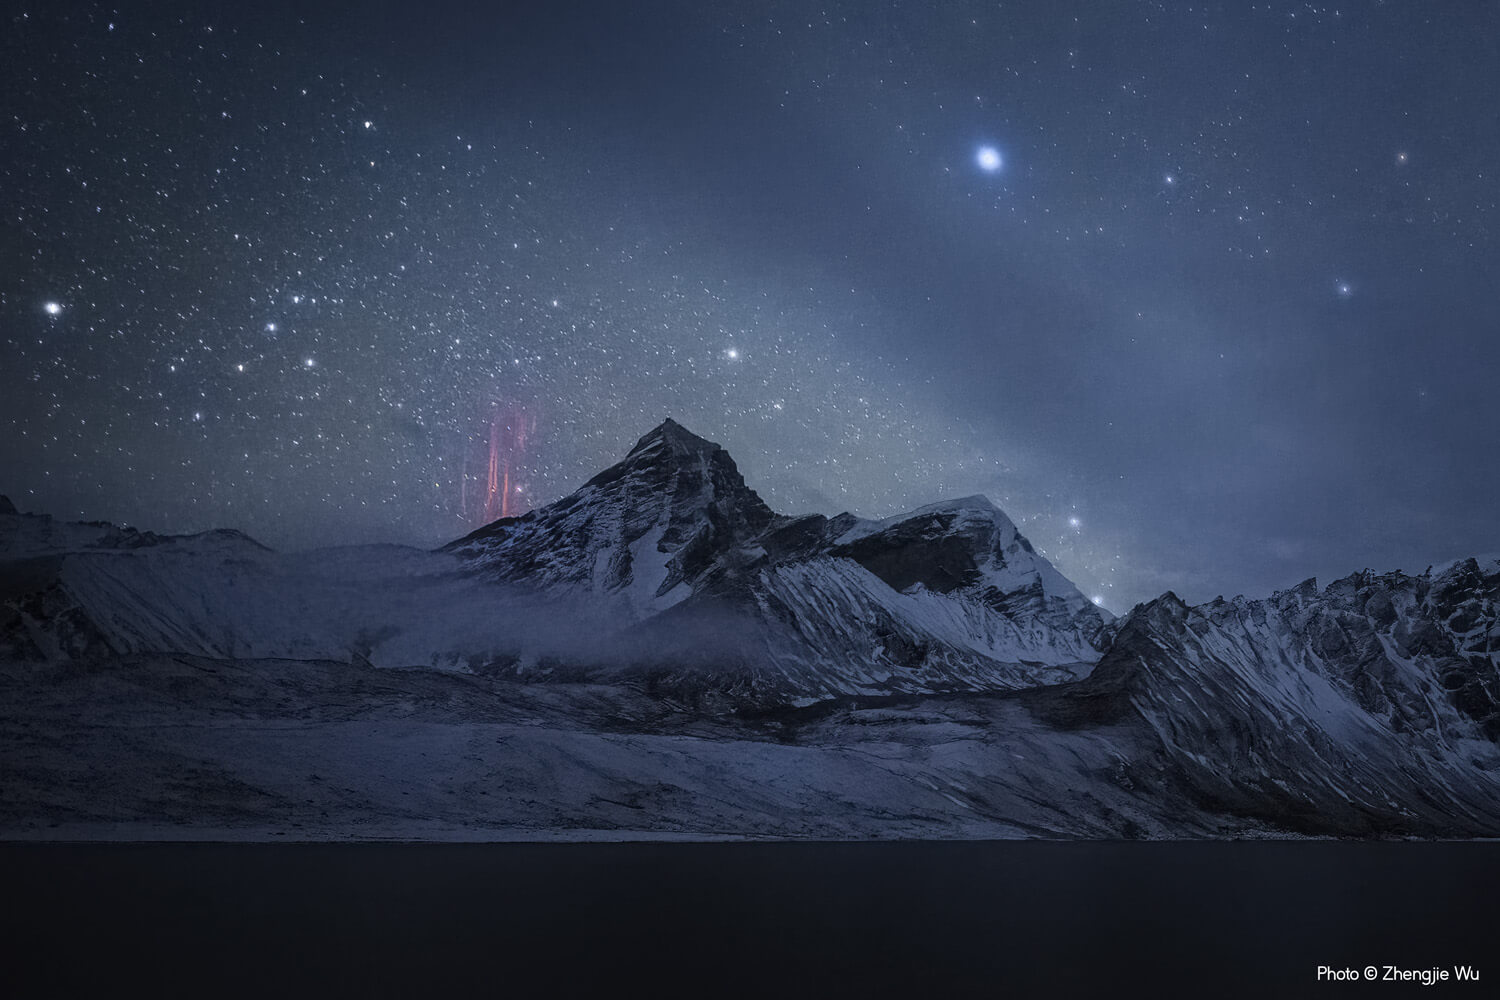 A night sky glittering with stars over mountainous terrain, with the rare red sprite lightning phenomenon visible above the peaks, adding a touch of mystery to the scene.